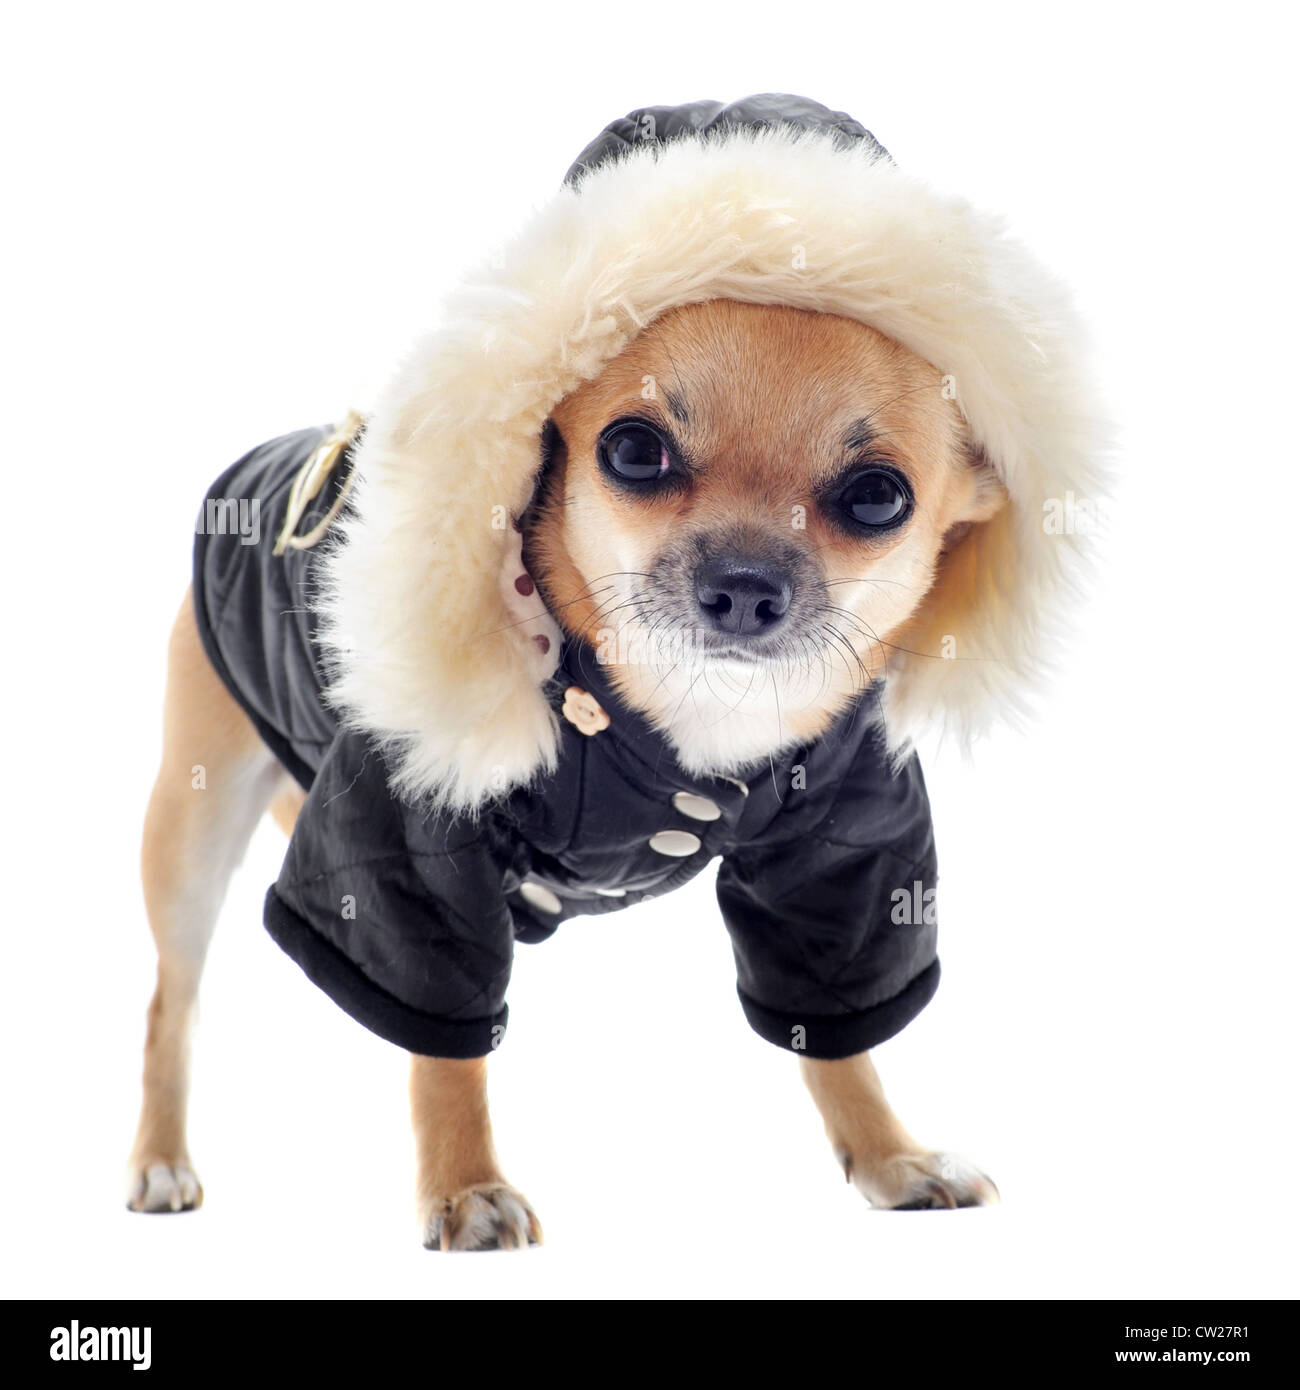 Chihuahua Long Coat High Resolution Stock Photography and Images - Alamy